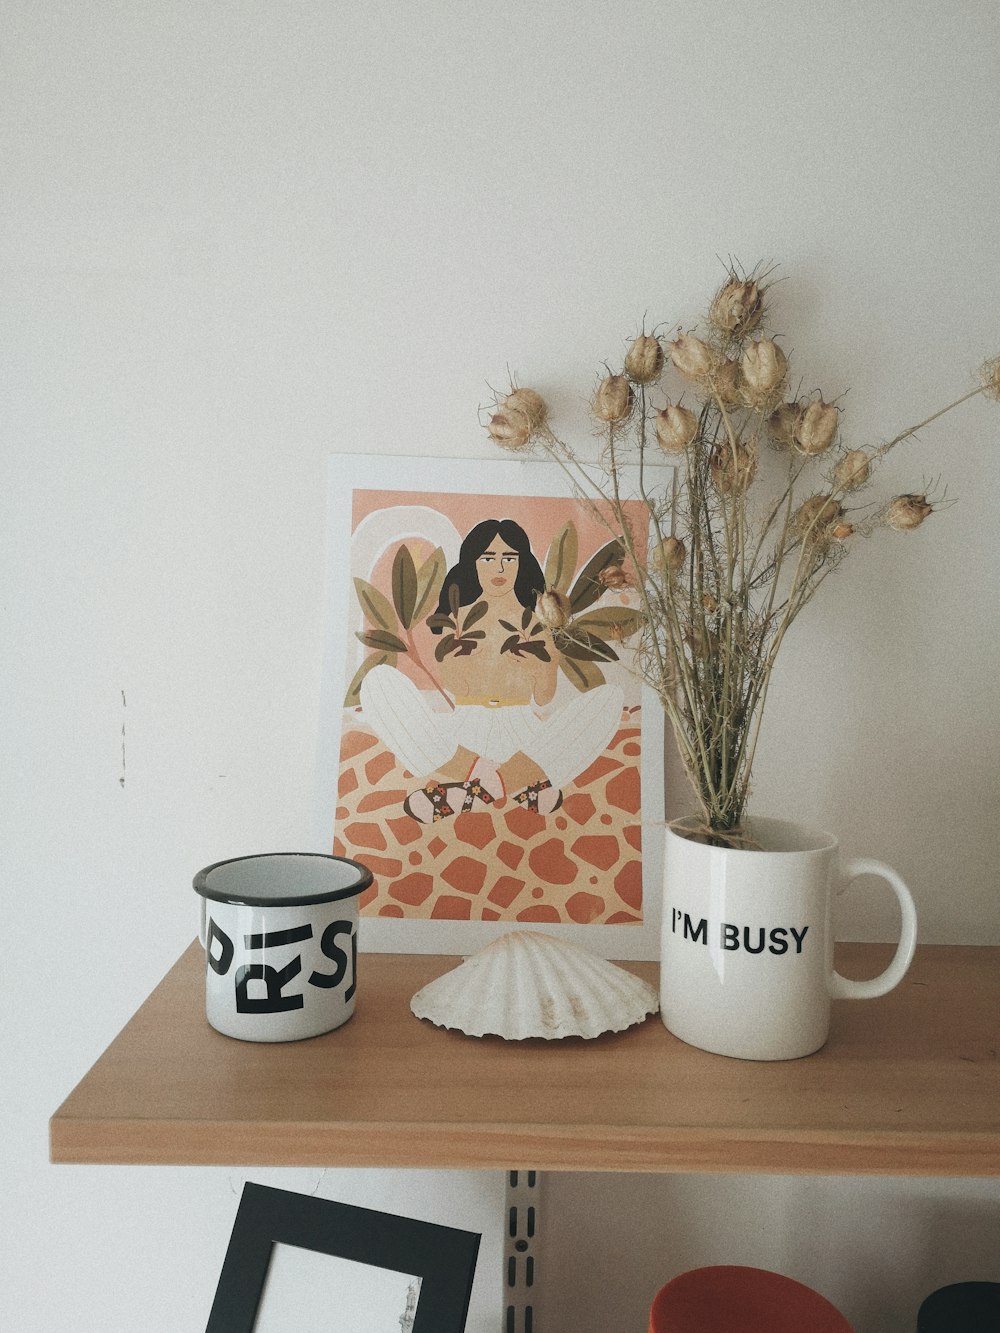 a picture of a woman and a cup of coffee on a shelf